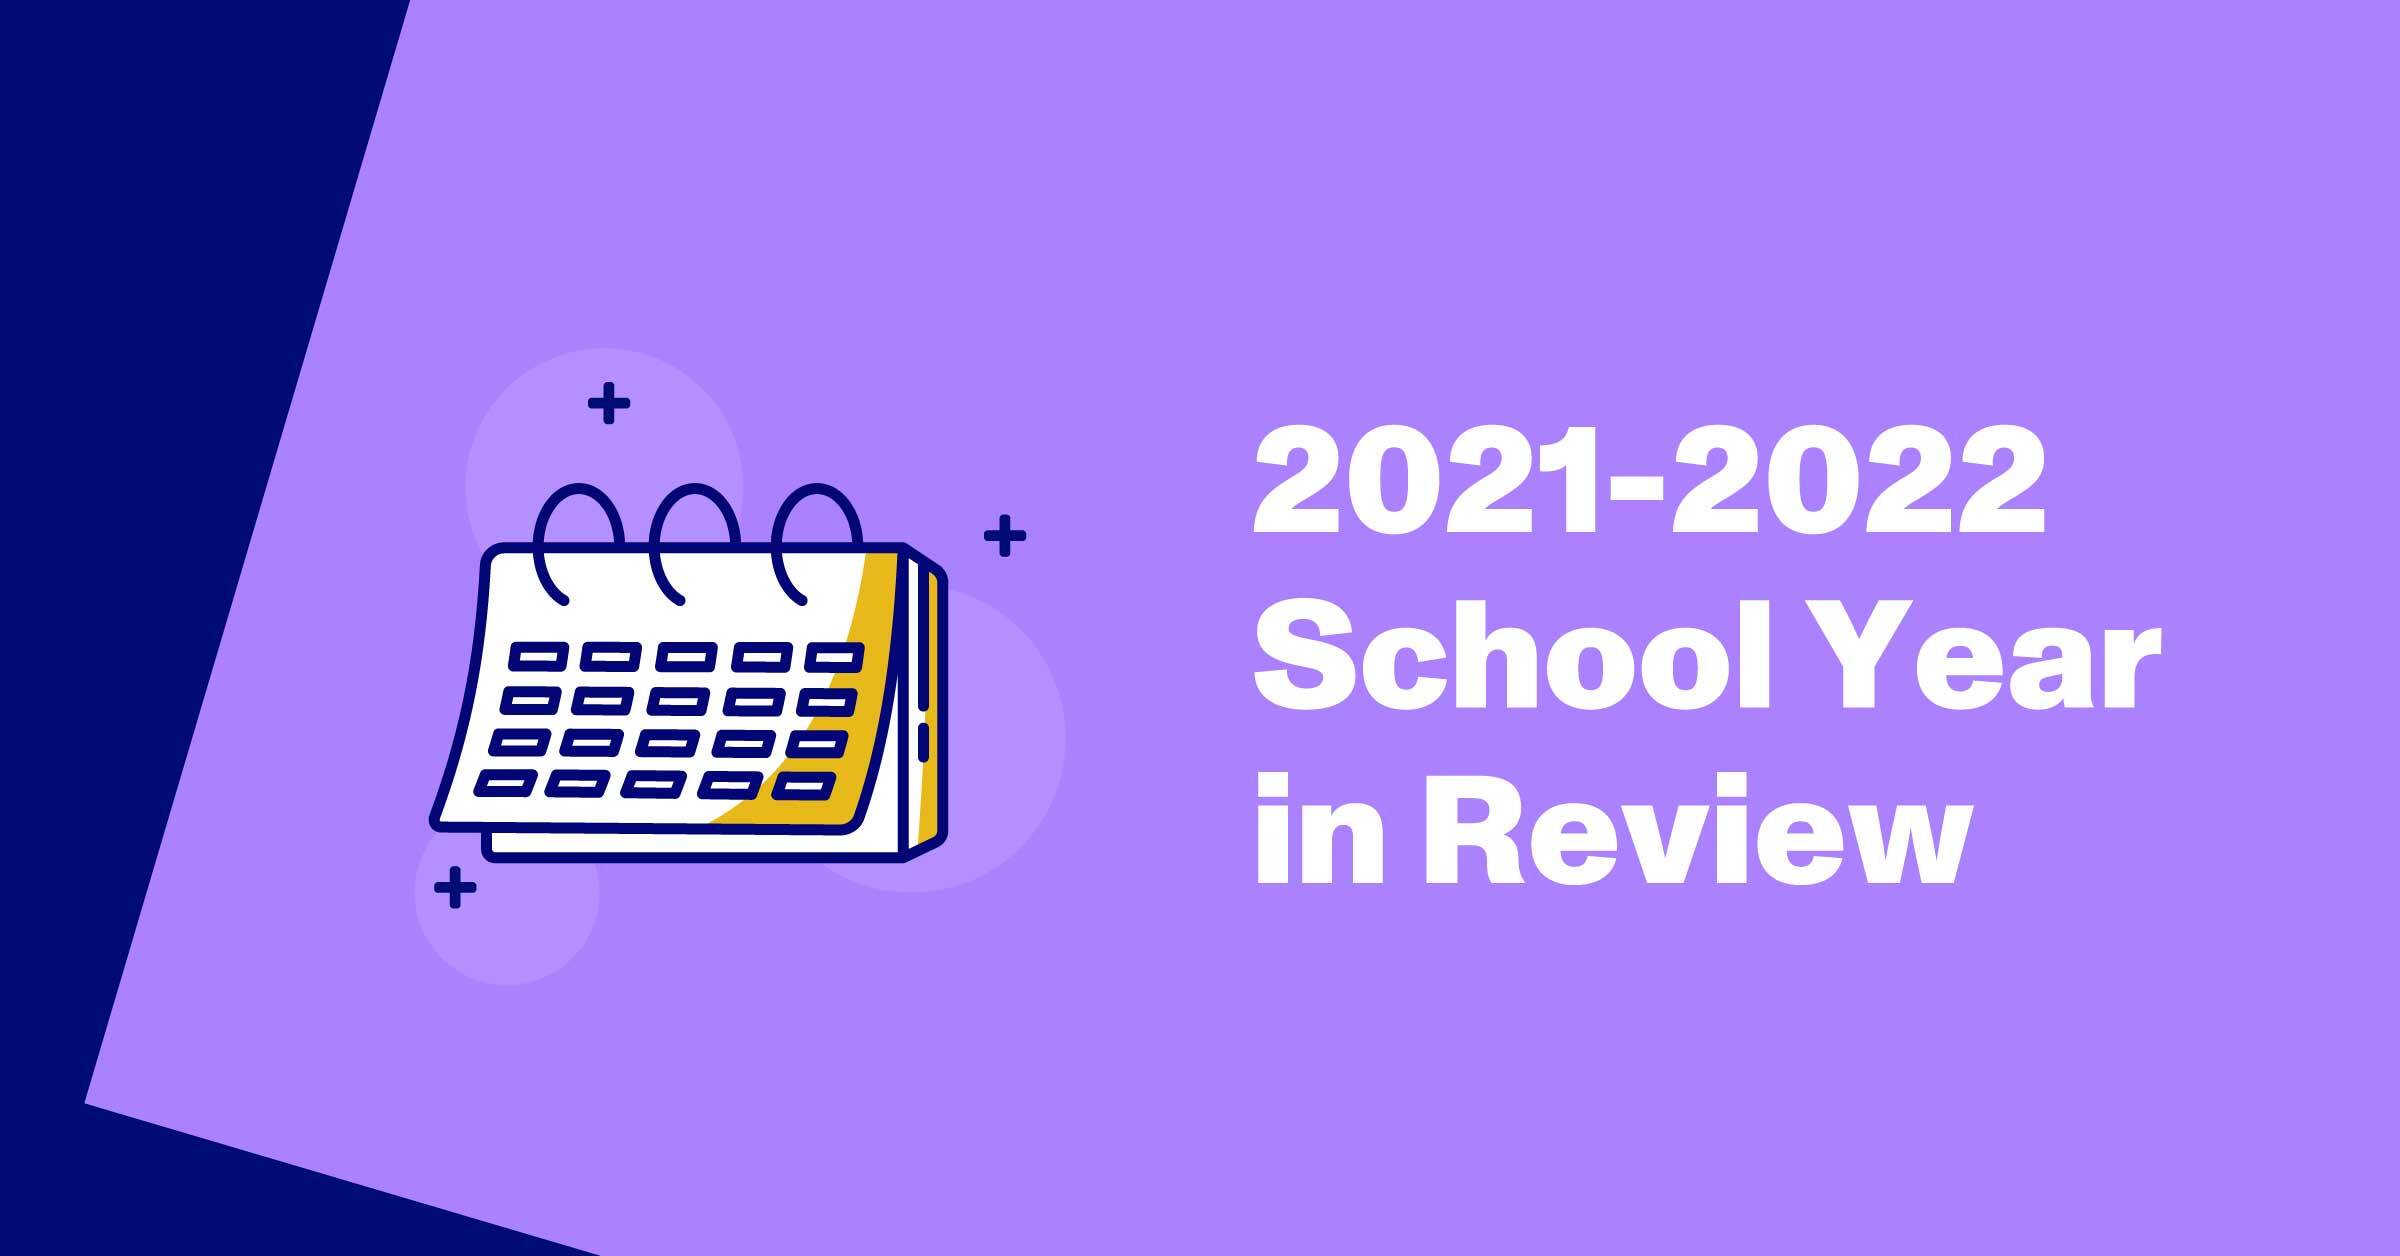 2021-2022 School Year in Review